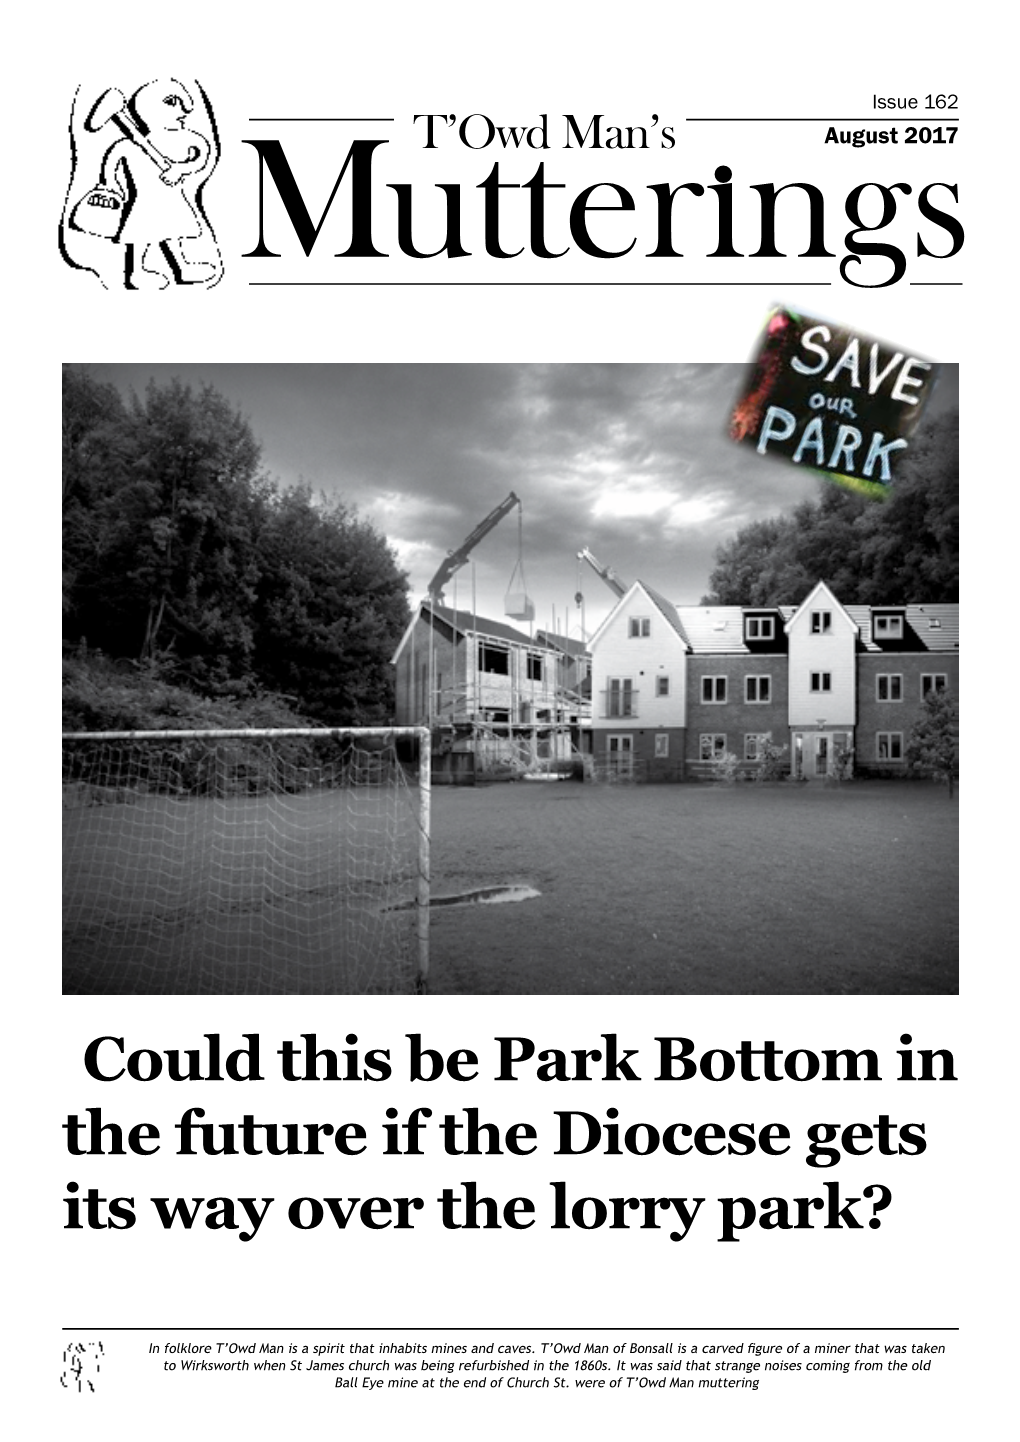 Could This Be Park Bottom in the Future If the Diocese Gets Its Way Over the Lorry Park?